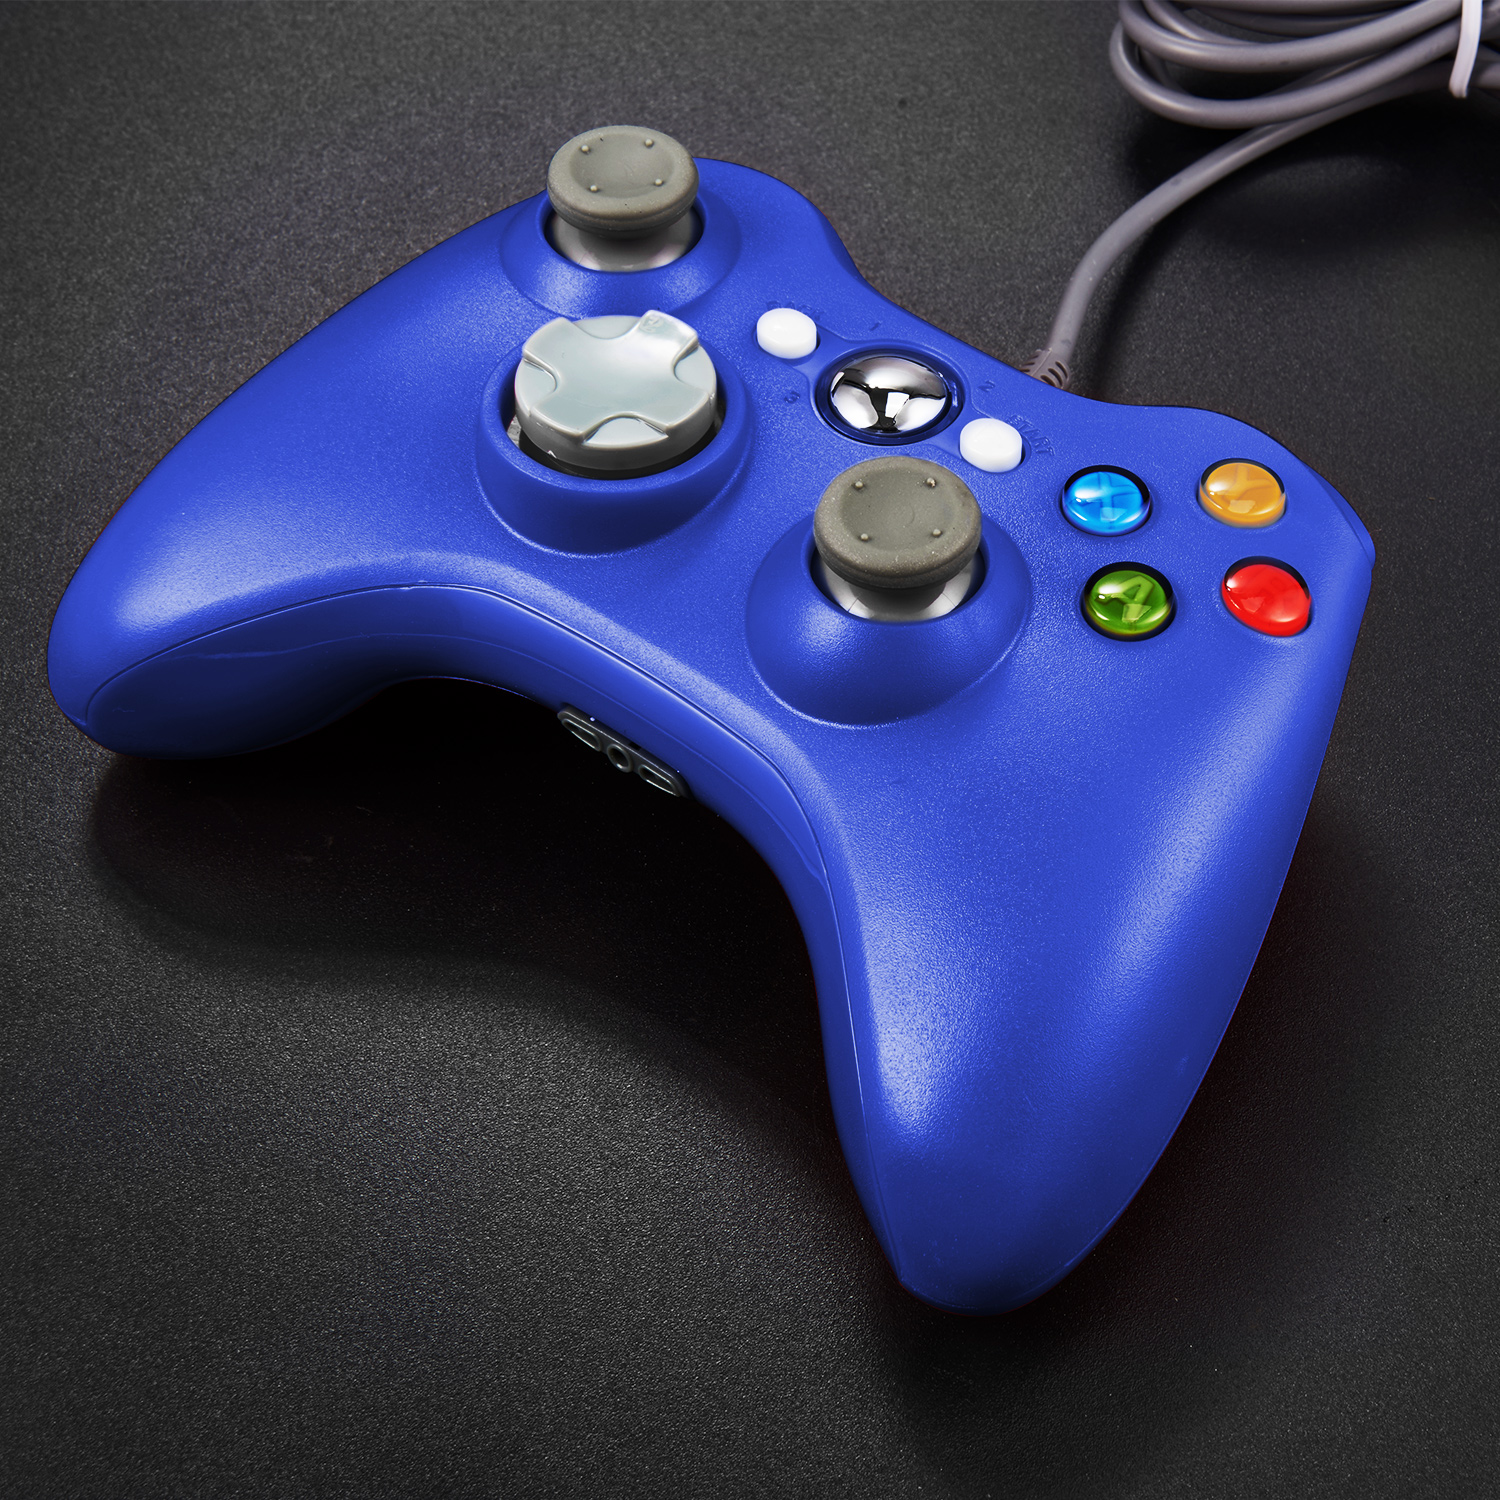 LUXMO Xbox 360 Wired Controlle with Shoulders Buttons for Xbox 360/Xbox 360 Slim/PC Windows 7 8 10 Game (Blue) - image 5 of 7